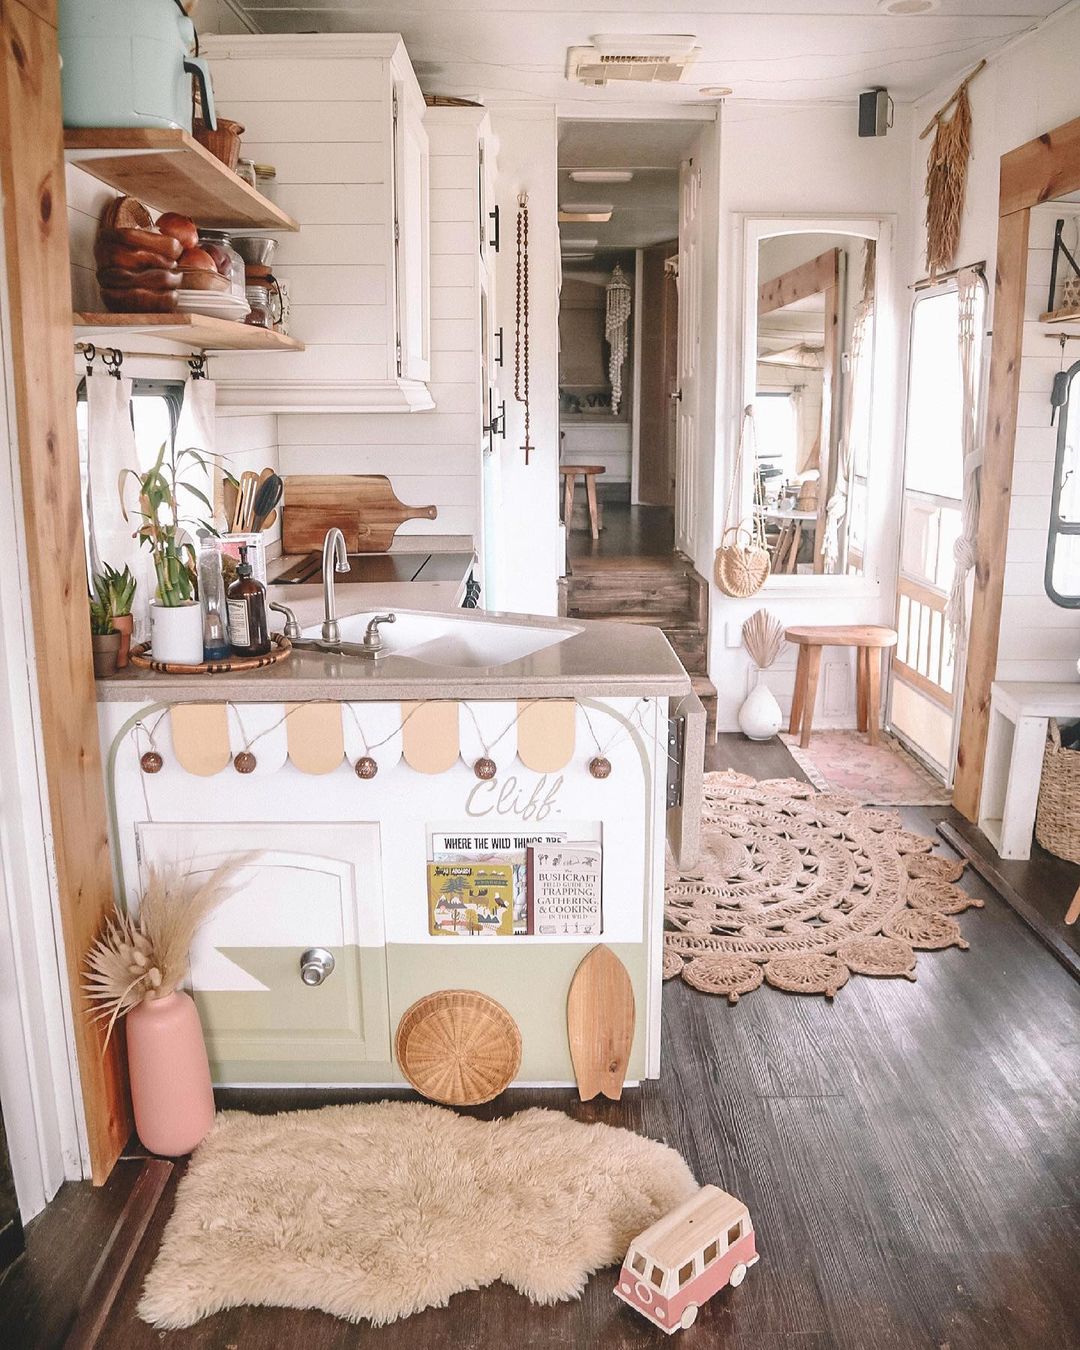 Kitchen area with kid play area in RV. Photo by Instagram user @shelbyadrift.